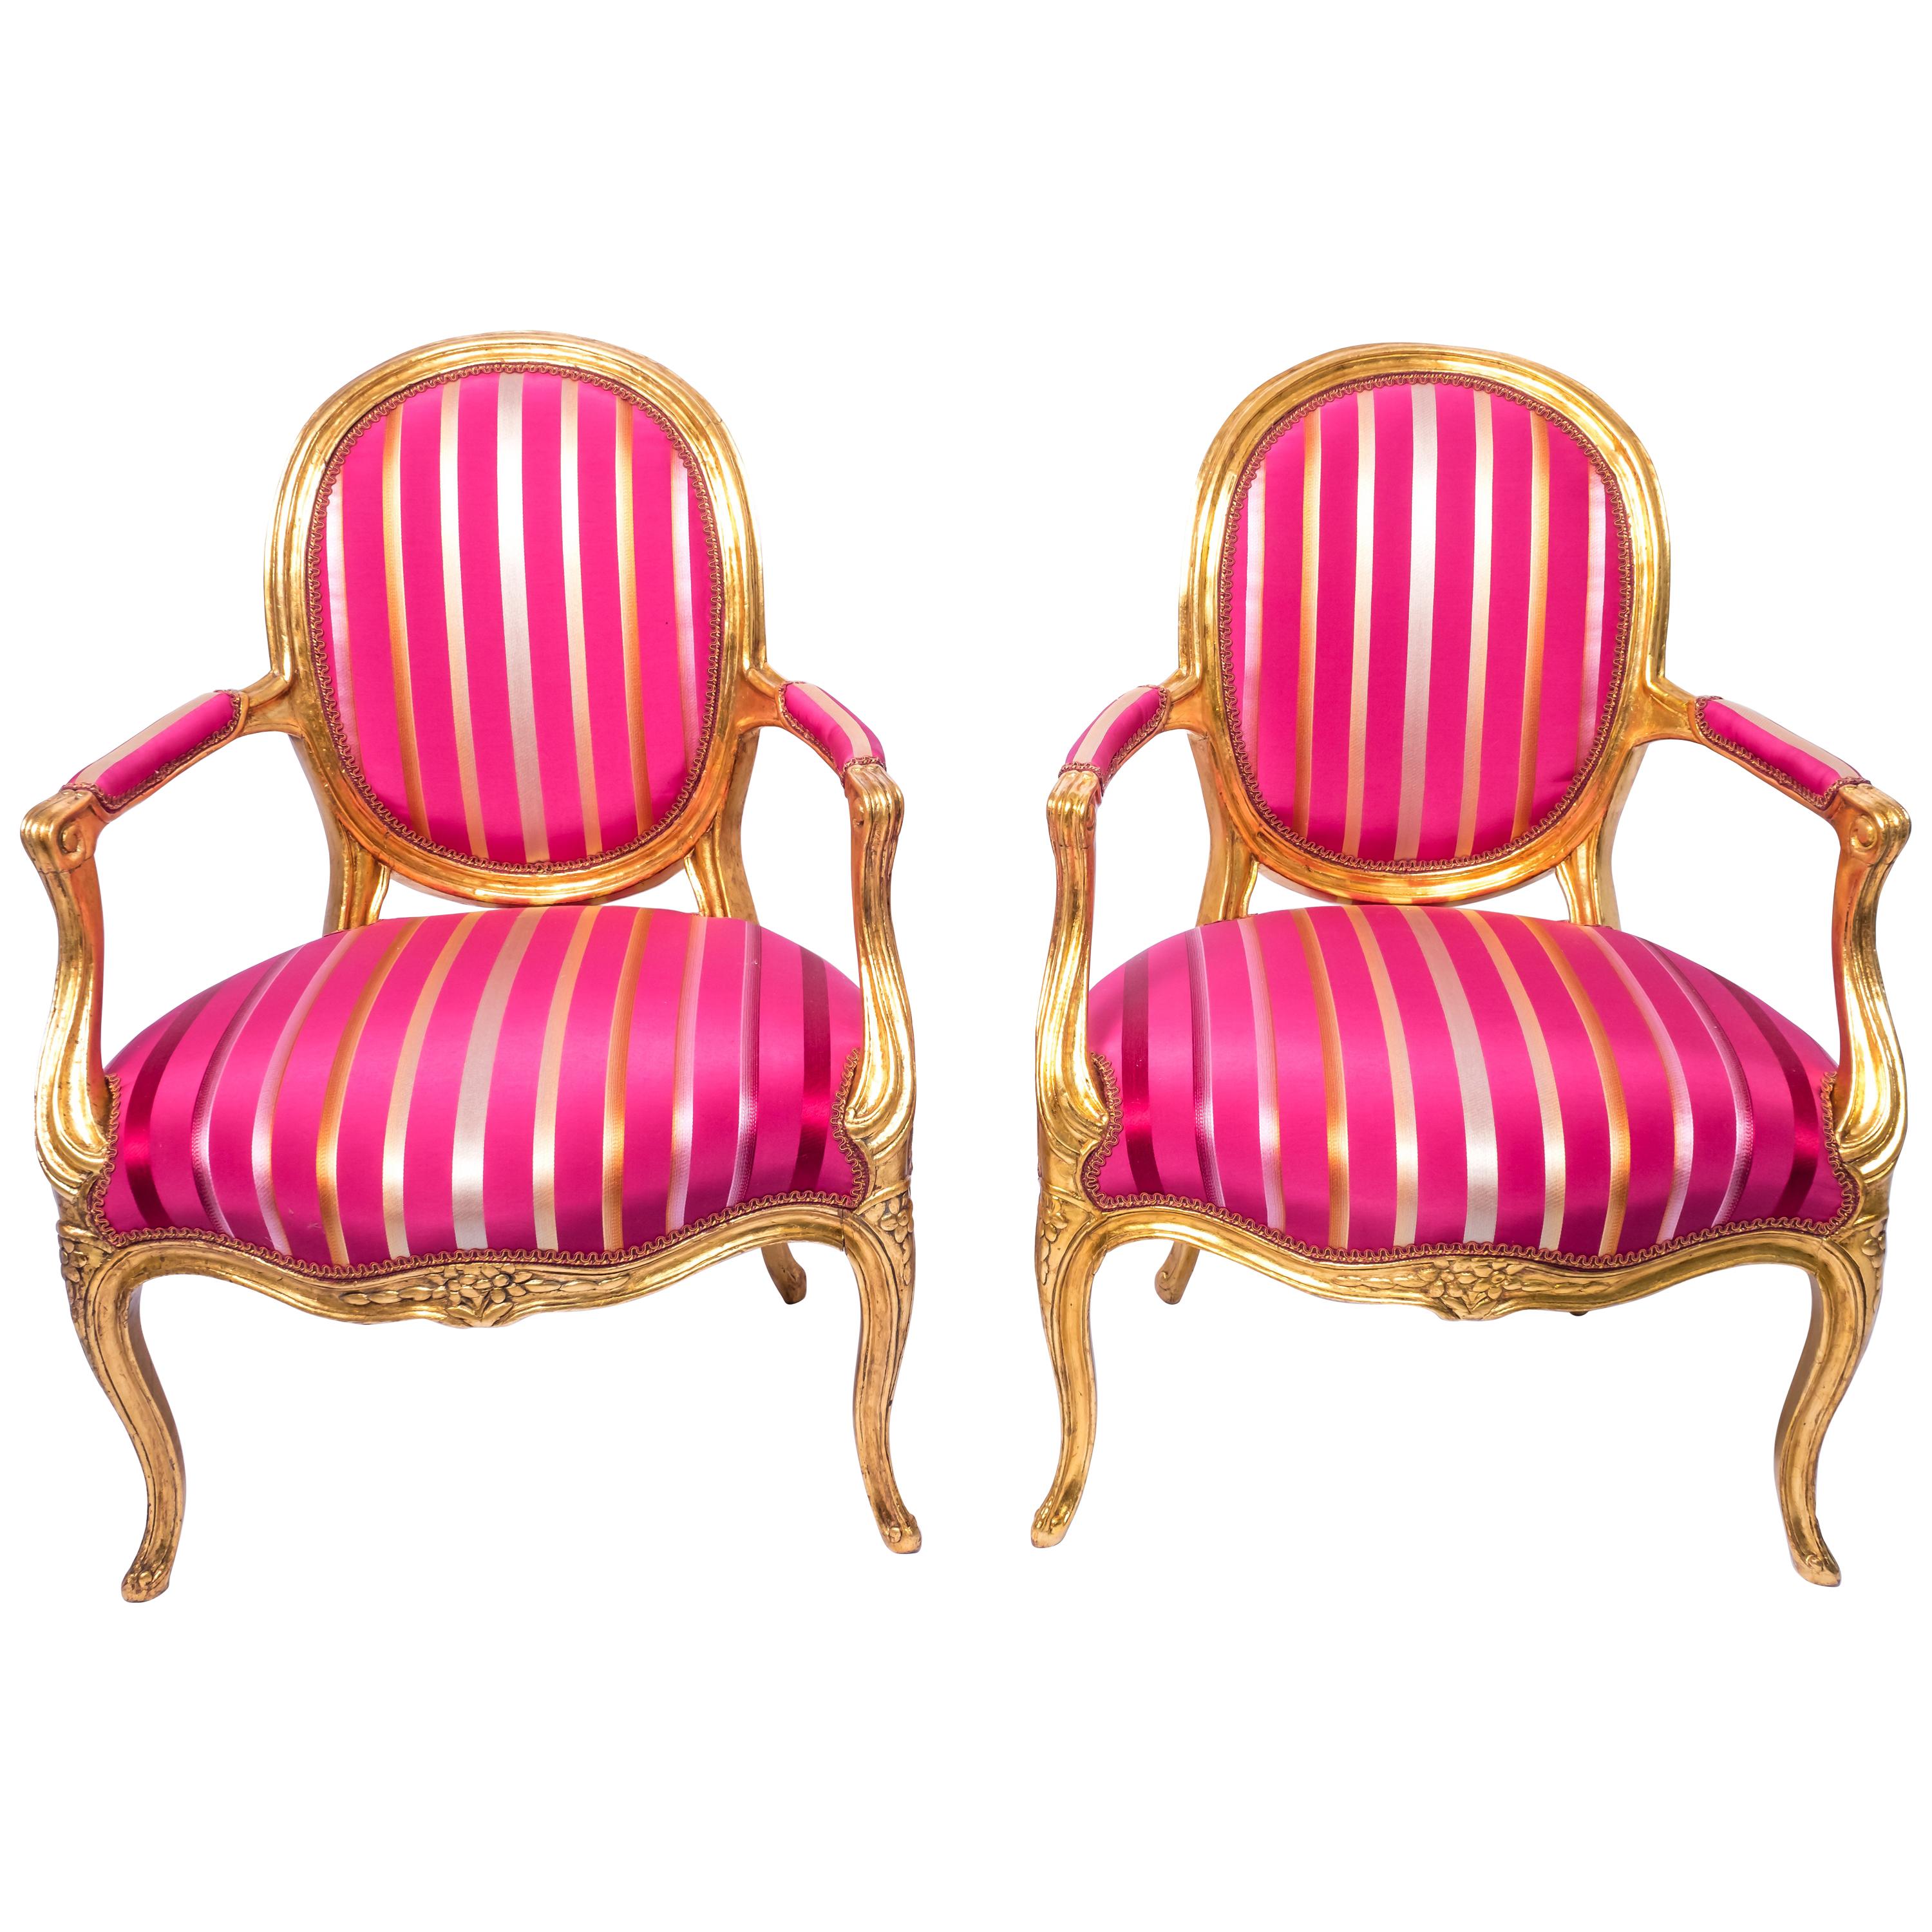 *B Pair of Louis XVI style magenta armchairs. French, early 20th Century.